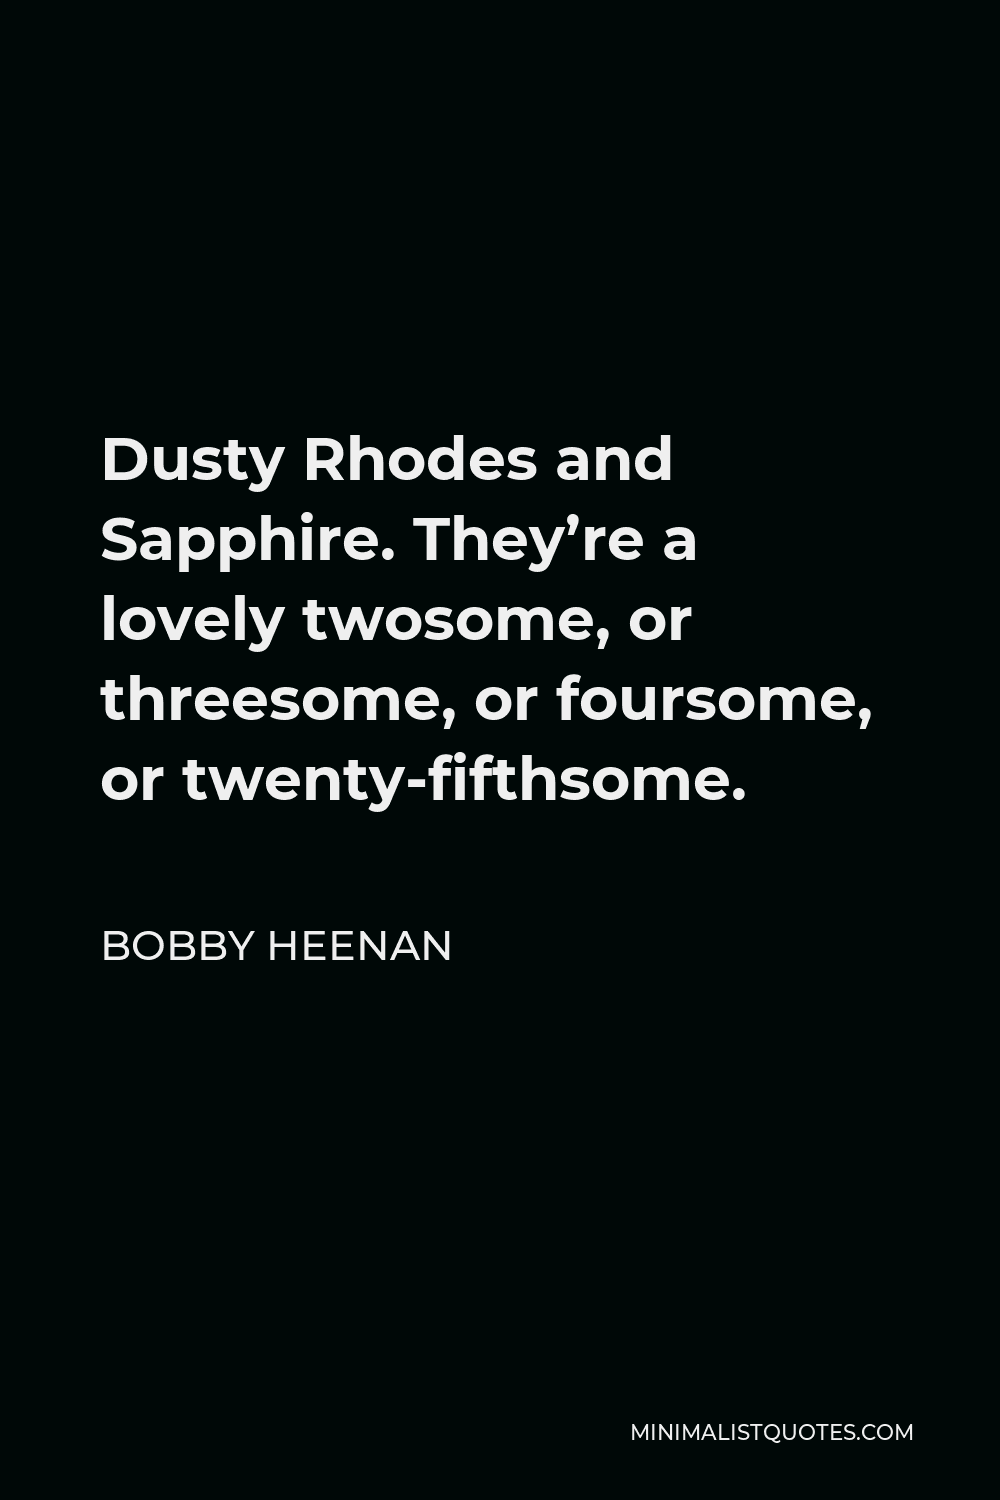 Bobby Heenan Quote Dusty Rhodes And Sapphire They Re A Lovely Twosome Or Threesome Or